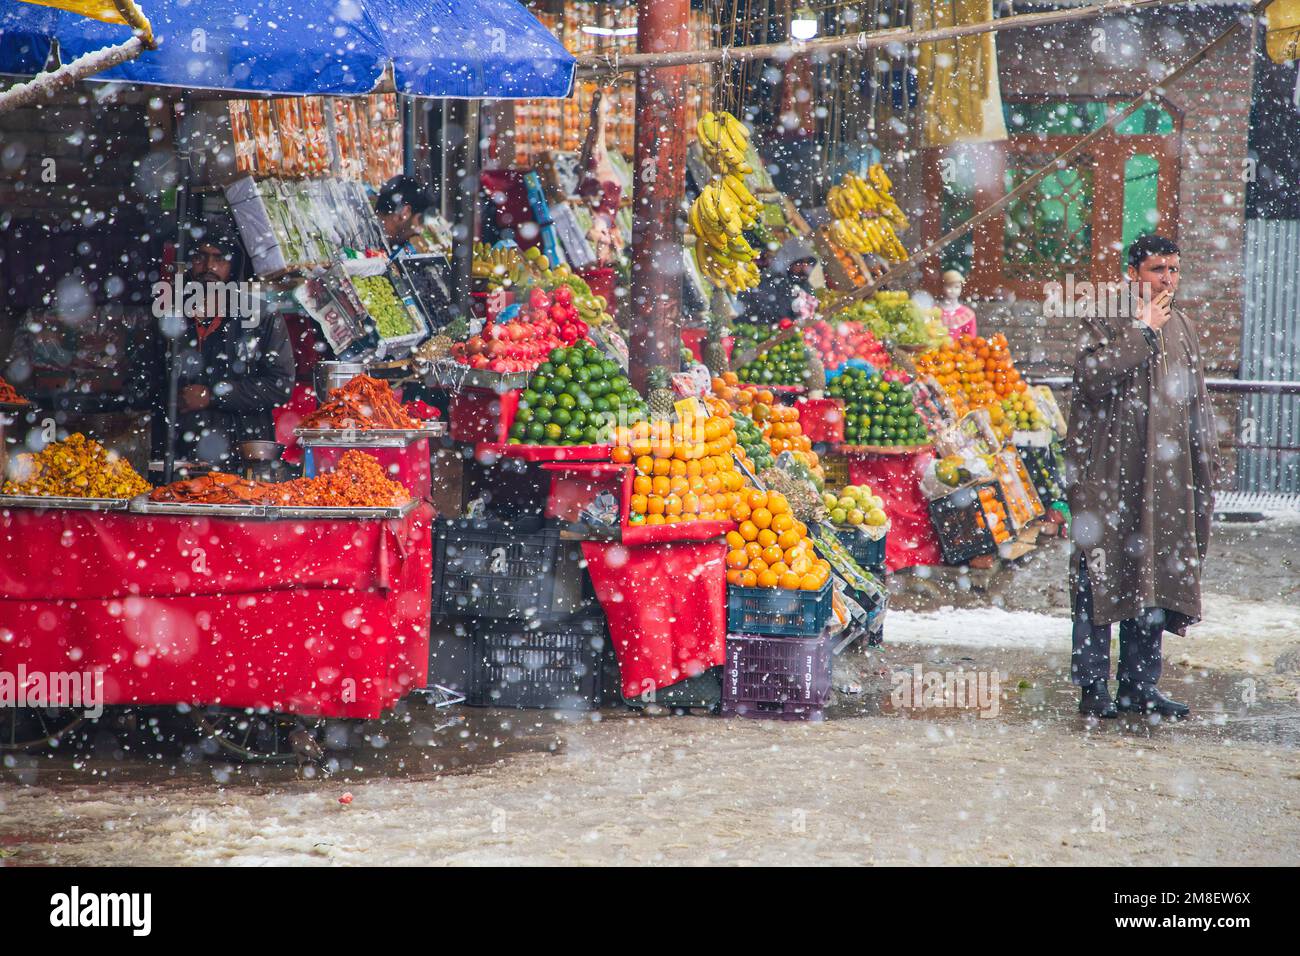 A fruit vendor waiting for customers amid ongoing heavy snowfall on the outskirts of Srinagar. At least two labourers killed on Thursday after an avalanche hits high-altitude area in central Kashmir's Sonamarg. Most parts of Kashmir received fresh snowfall that leading to the closure of Kashmir capital's main highway that connects disputed region with the rest of India. Meanwhile airport authorities suspended all flight operations till further notice due to continuous snowfall and low visibility. (Photo by Faisal Bashir/SOPA Images/Sipa USA) Stock Photo